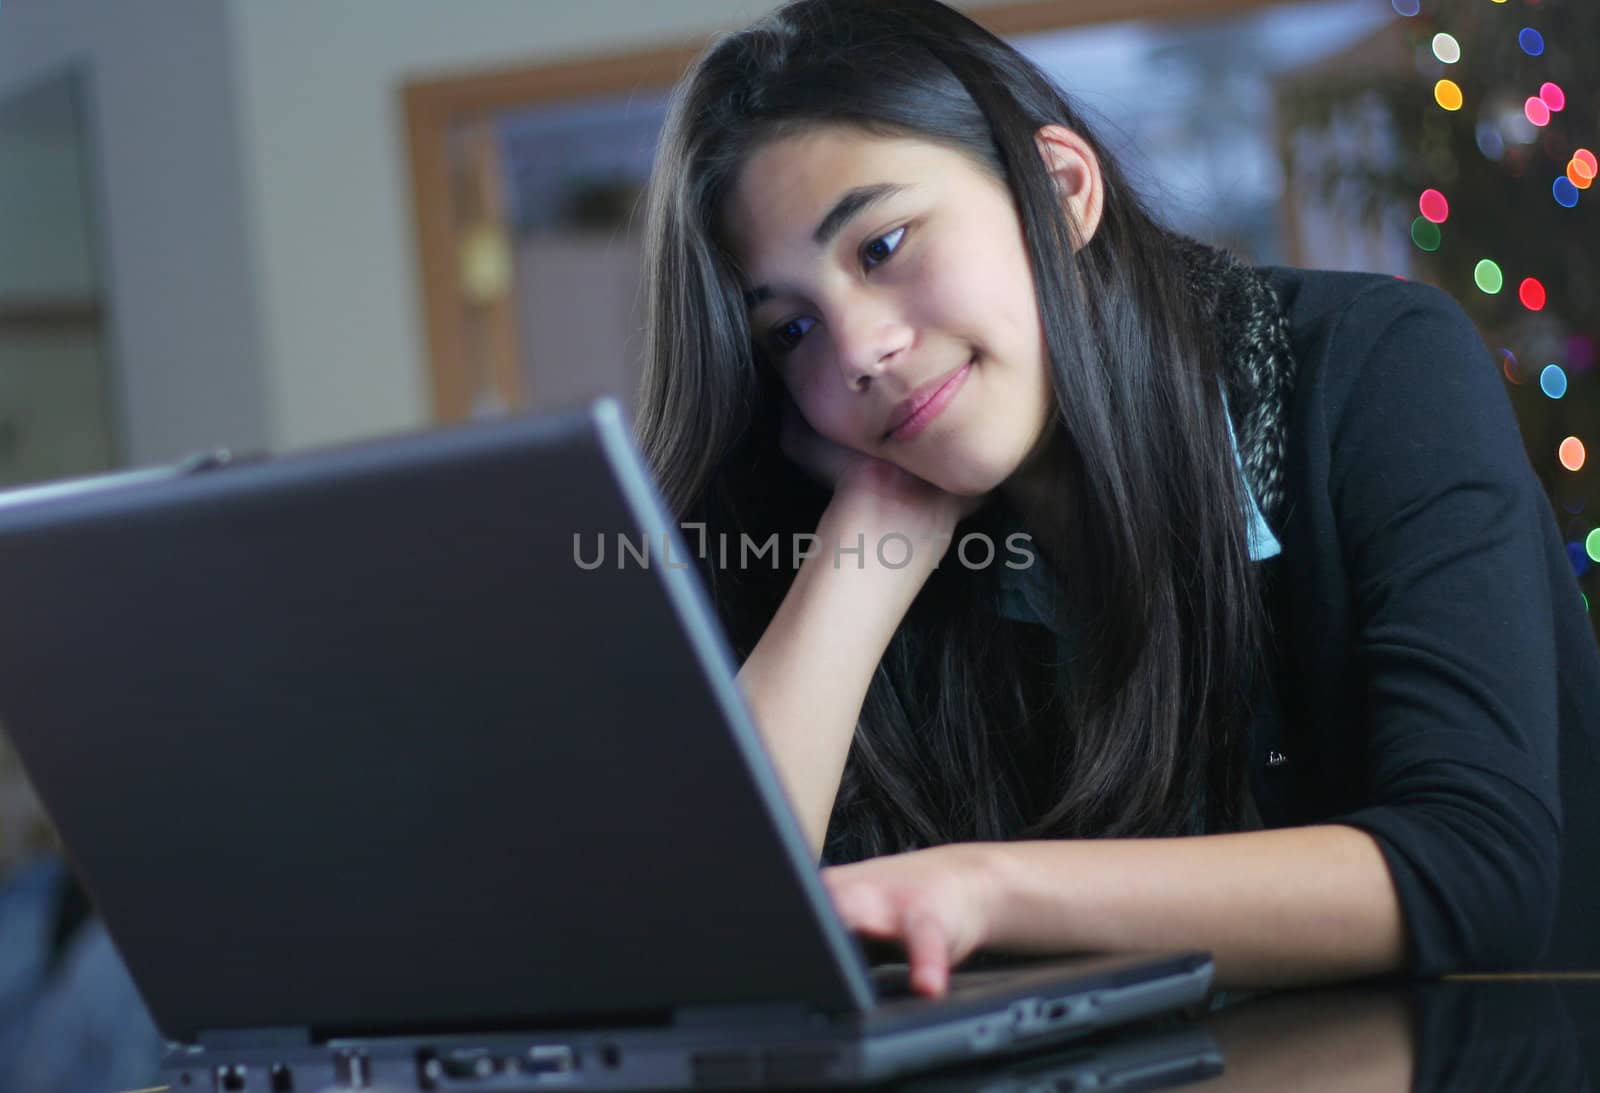 Young teen girl working on the laptop at night.